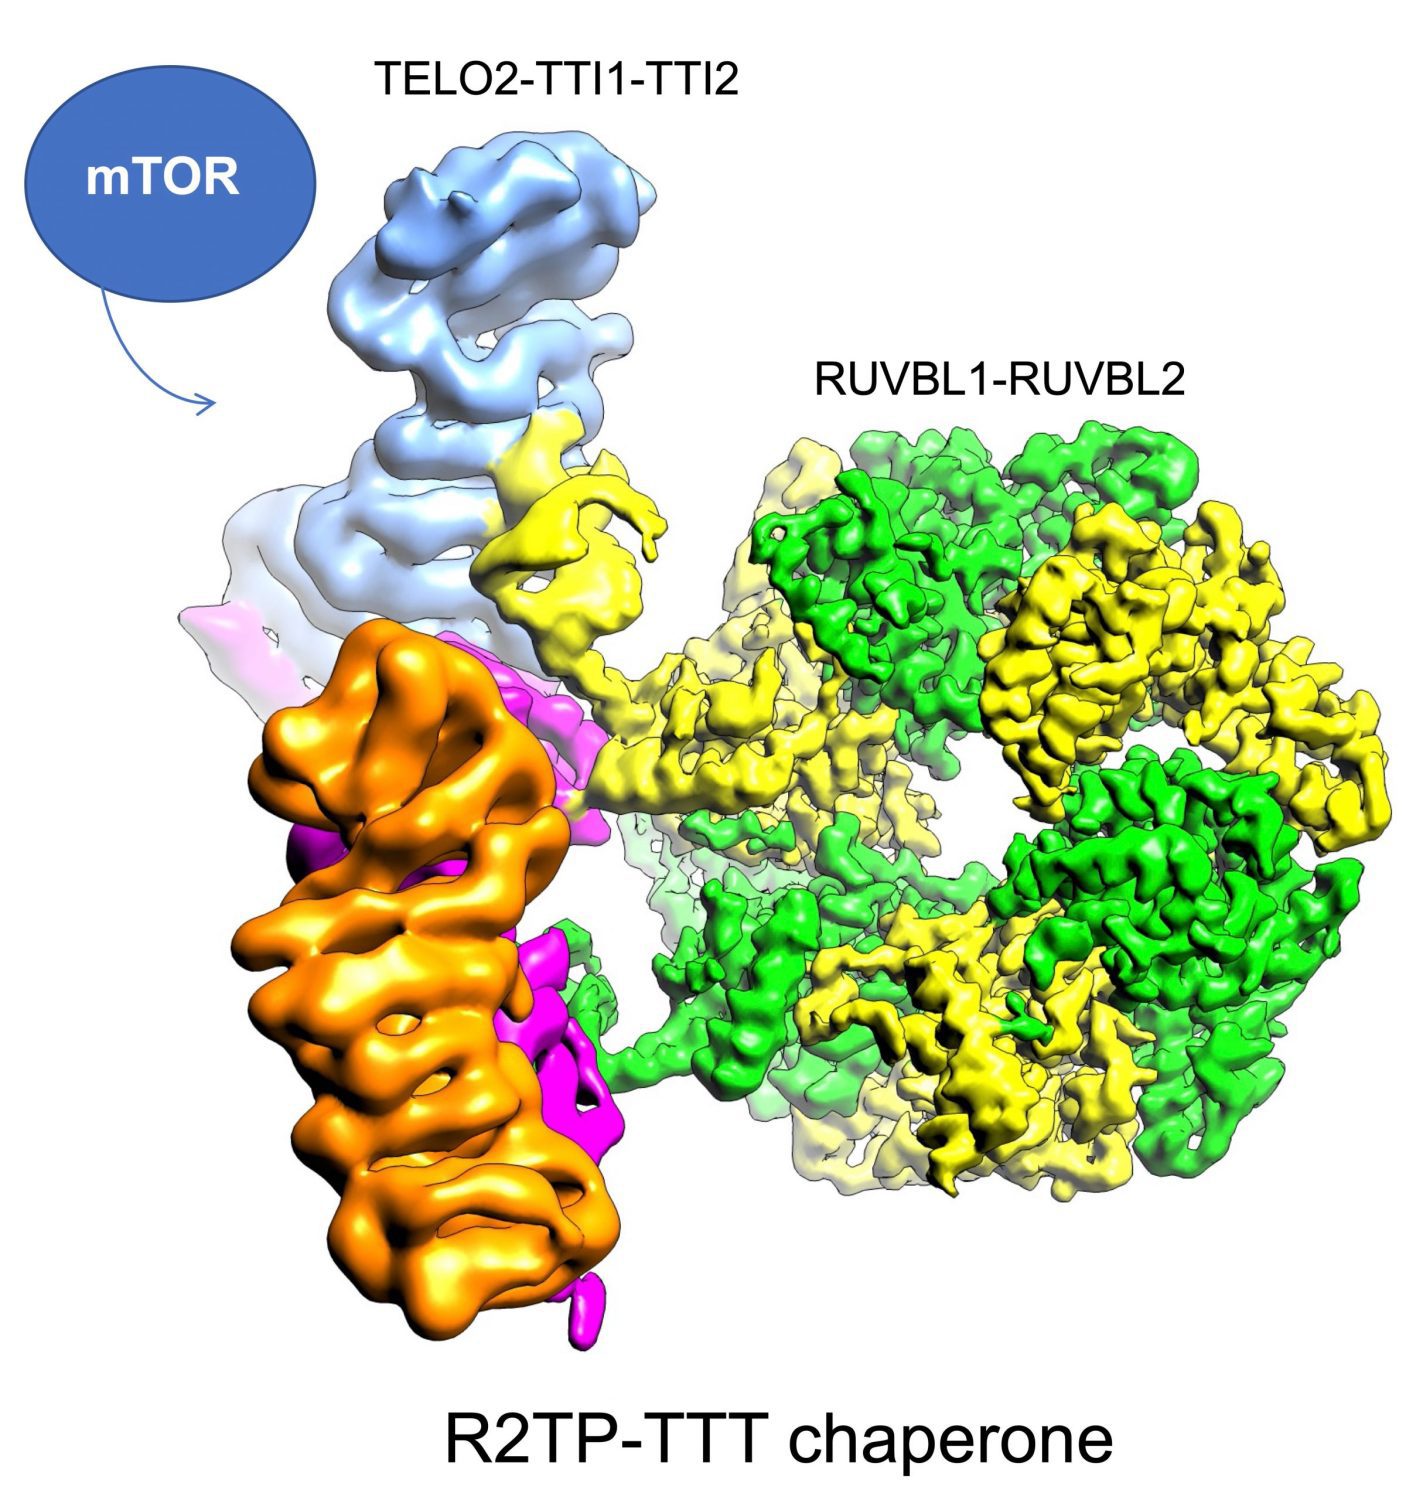 Structure of the proteins determined in the article, together with the rest of the proteins that form the complex that manages the assembly of mTOR /CNIO